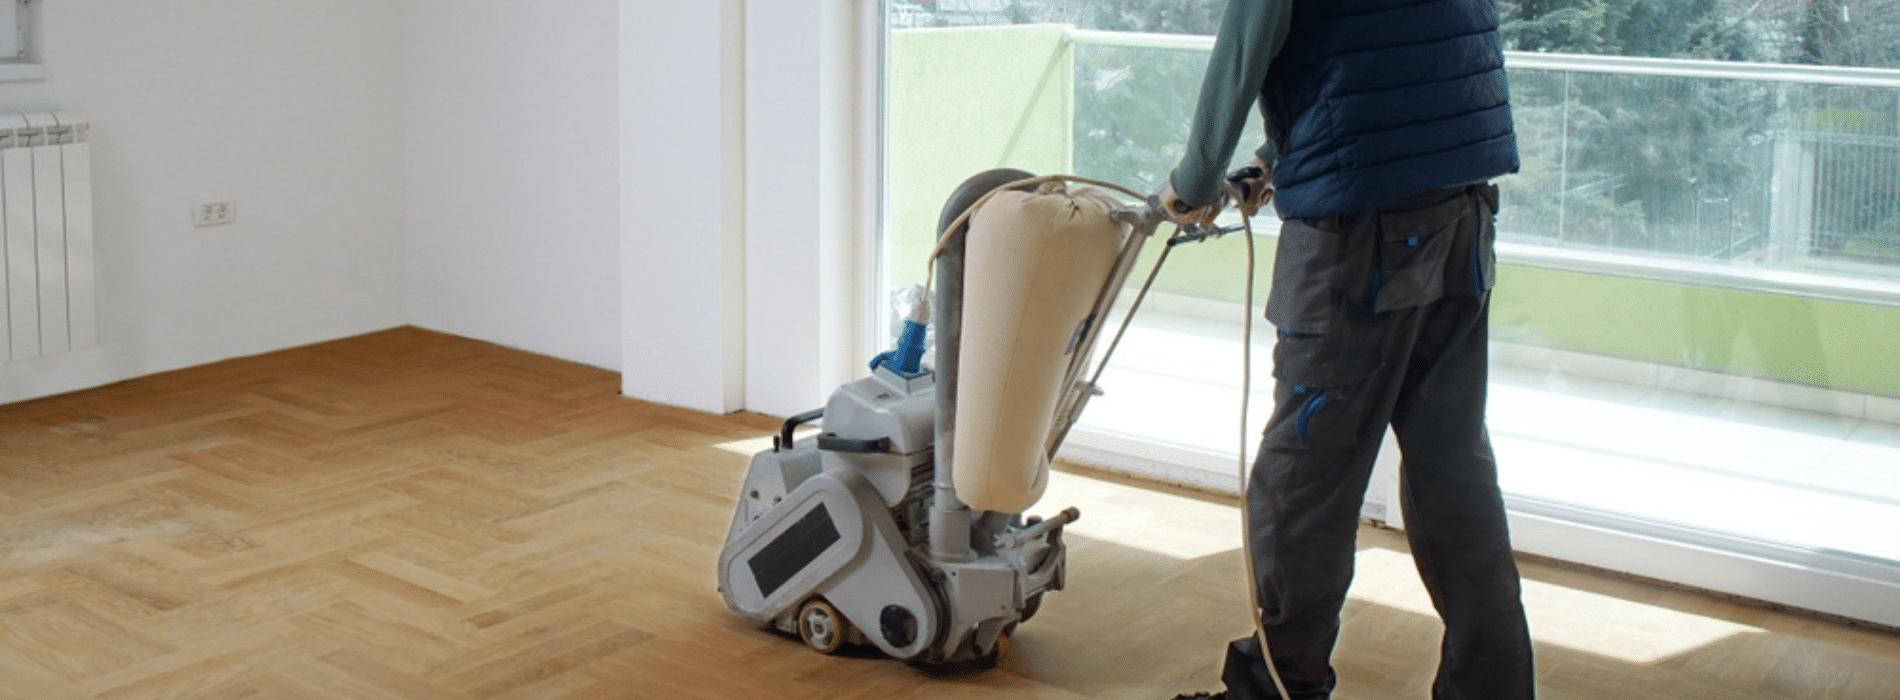 Mr Sander® meticulously sanding a herringbone floor using an Effect 2200 (230V, 50-60Hz) Bona belt sander. The 250x750 mm sander, connected to a HEPA-filtered dust extraction system, ensures a clean and efficient result for a flawless finish.